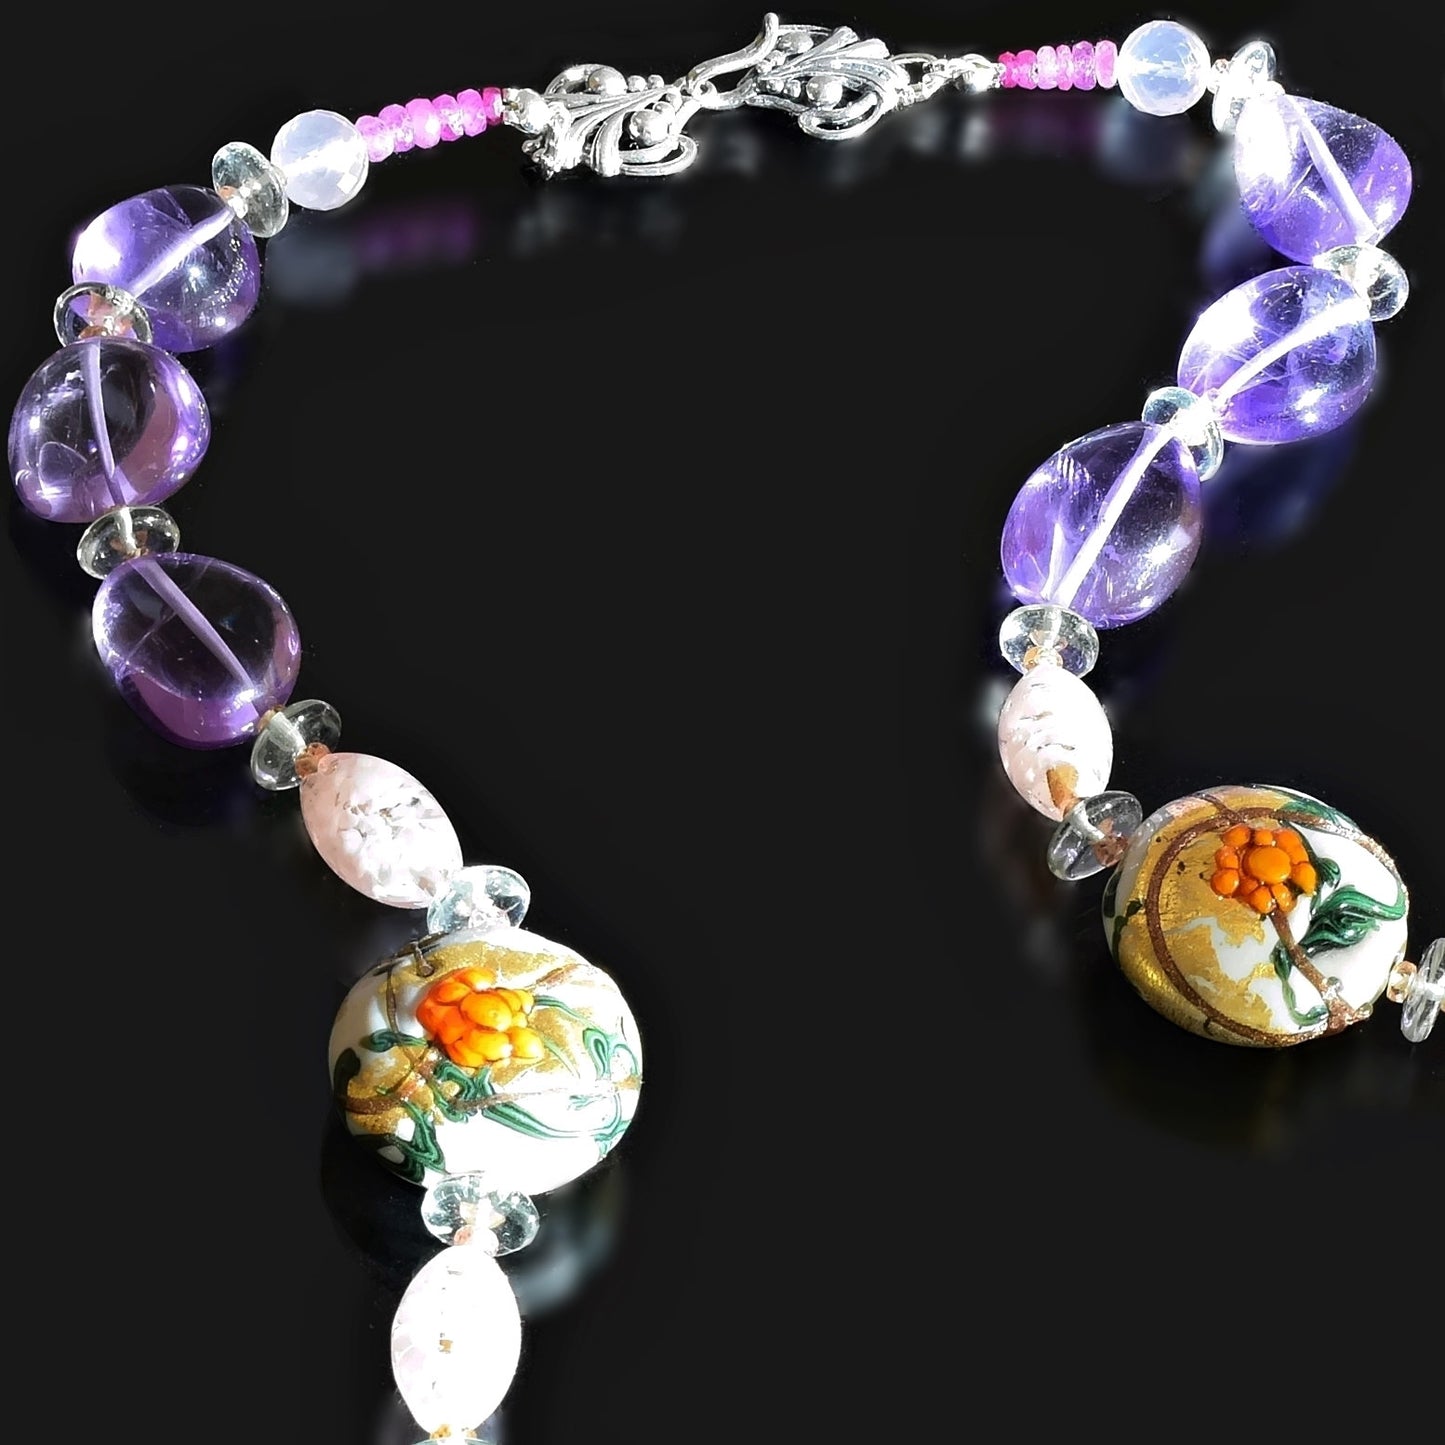 Murano Glass Floral Amethyst Necklace with Amethyst, Citrine and Sapphires  